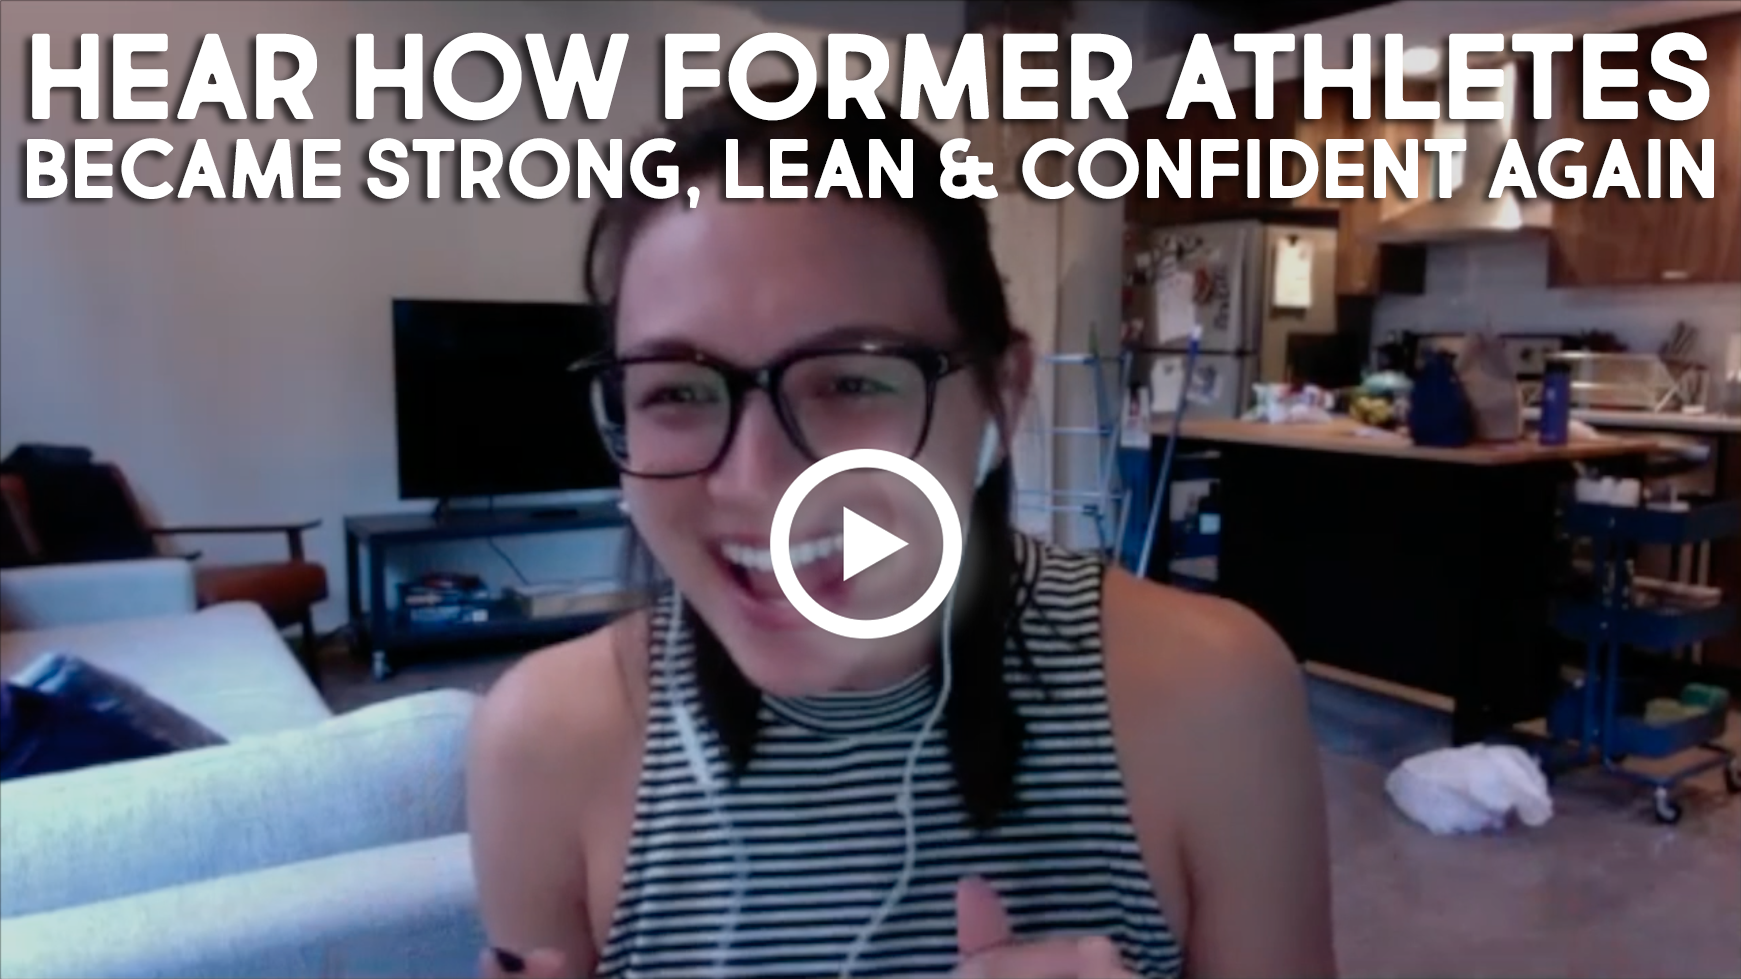 How Former Athletes Became Strong, Lean & Confident Again